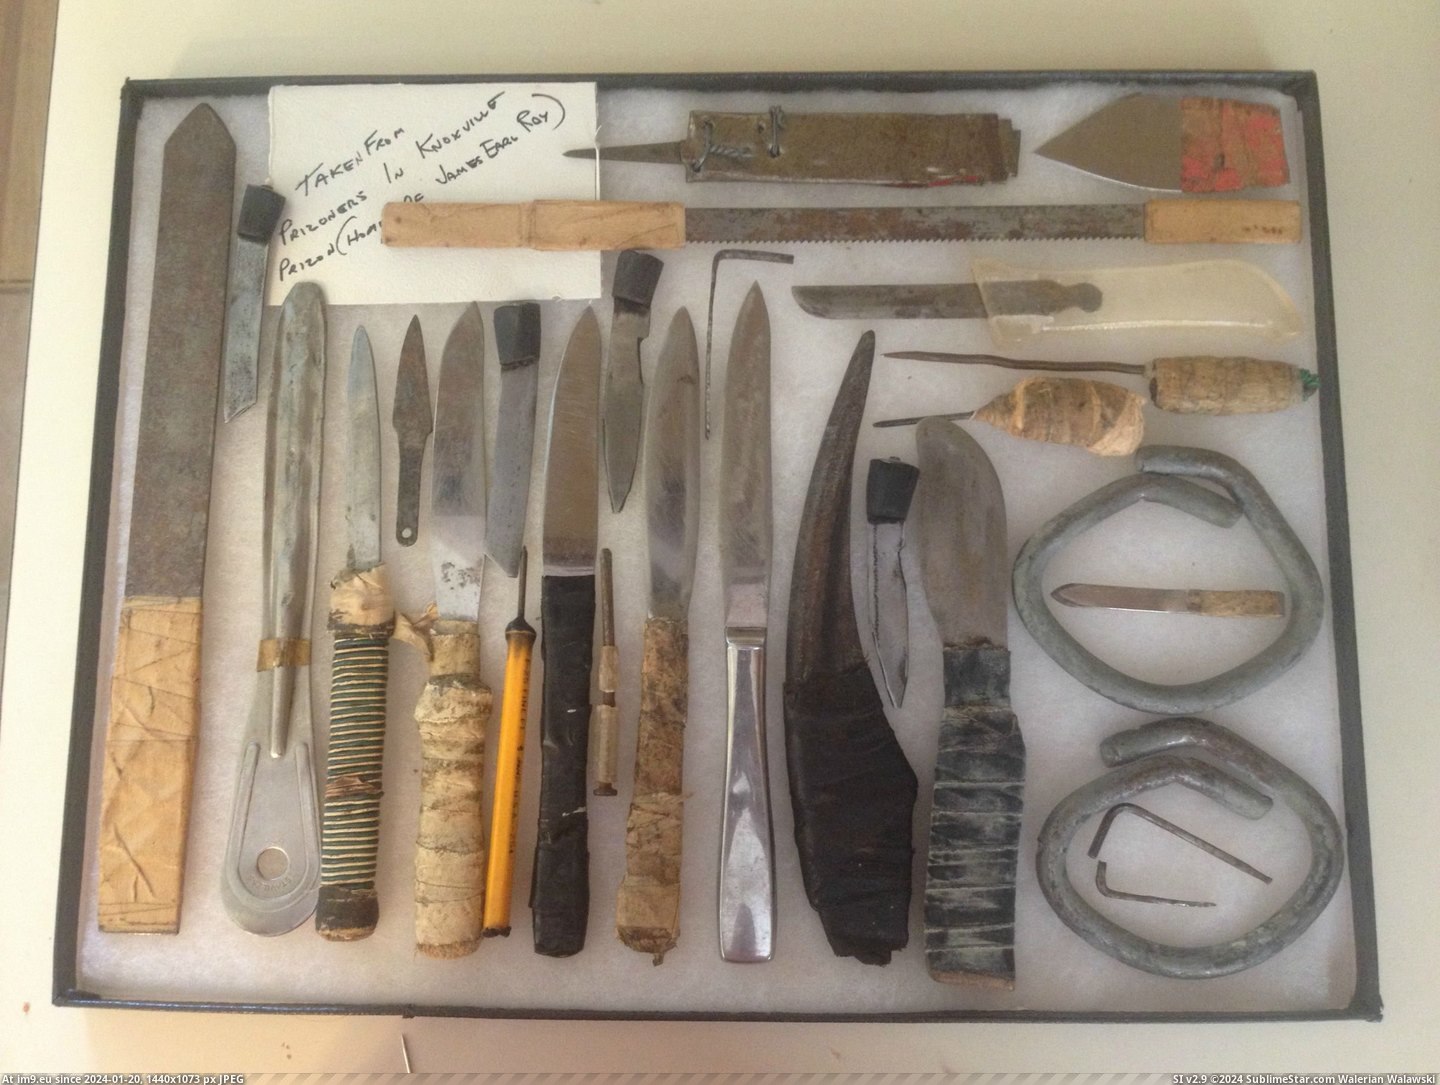 #Collection #Wtf #Shanks #Prison #Confiscated [Wtf] My collection of confiscated prison shanks Pic. (Bild von album My r/WTF favs))